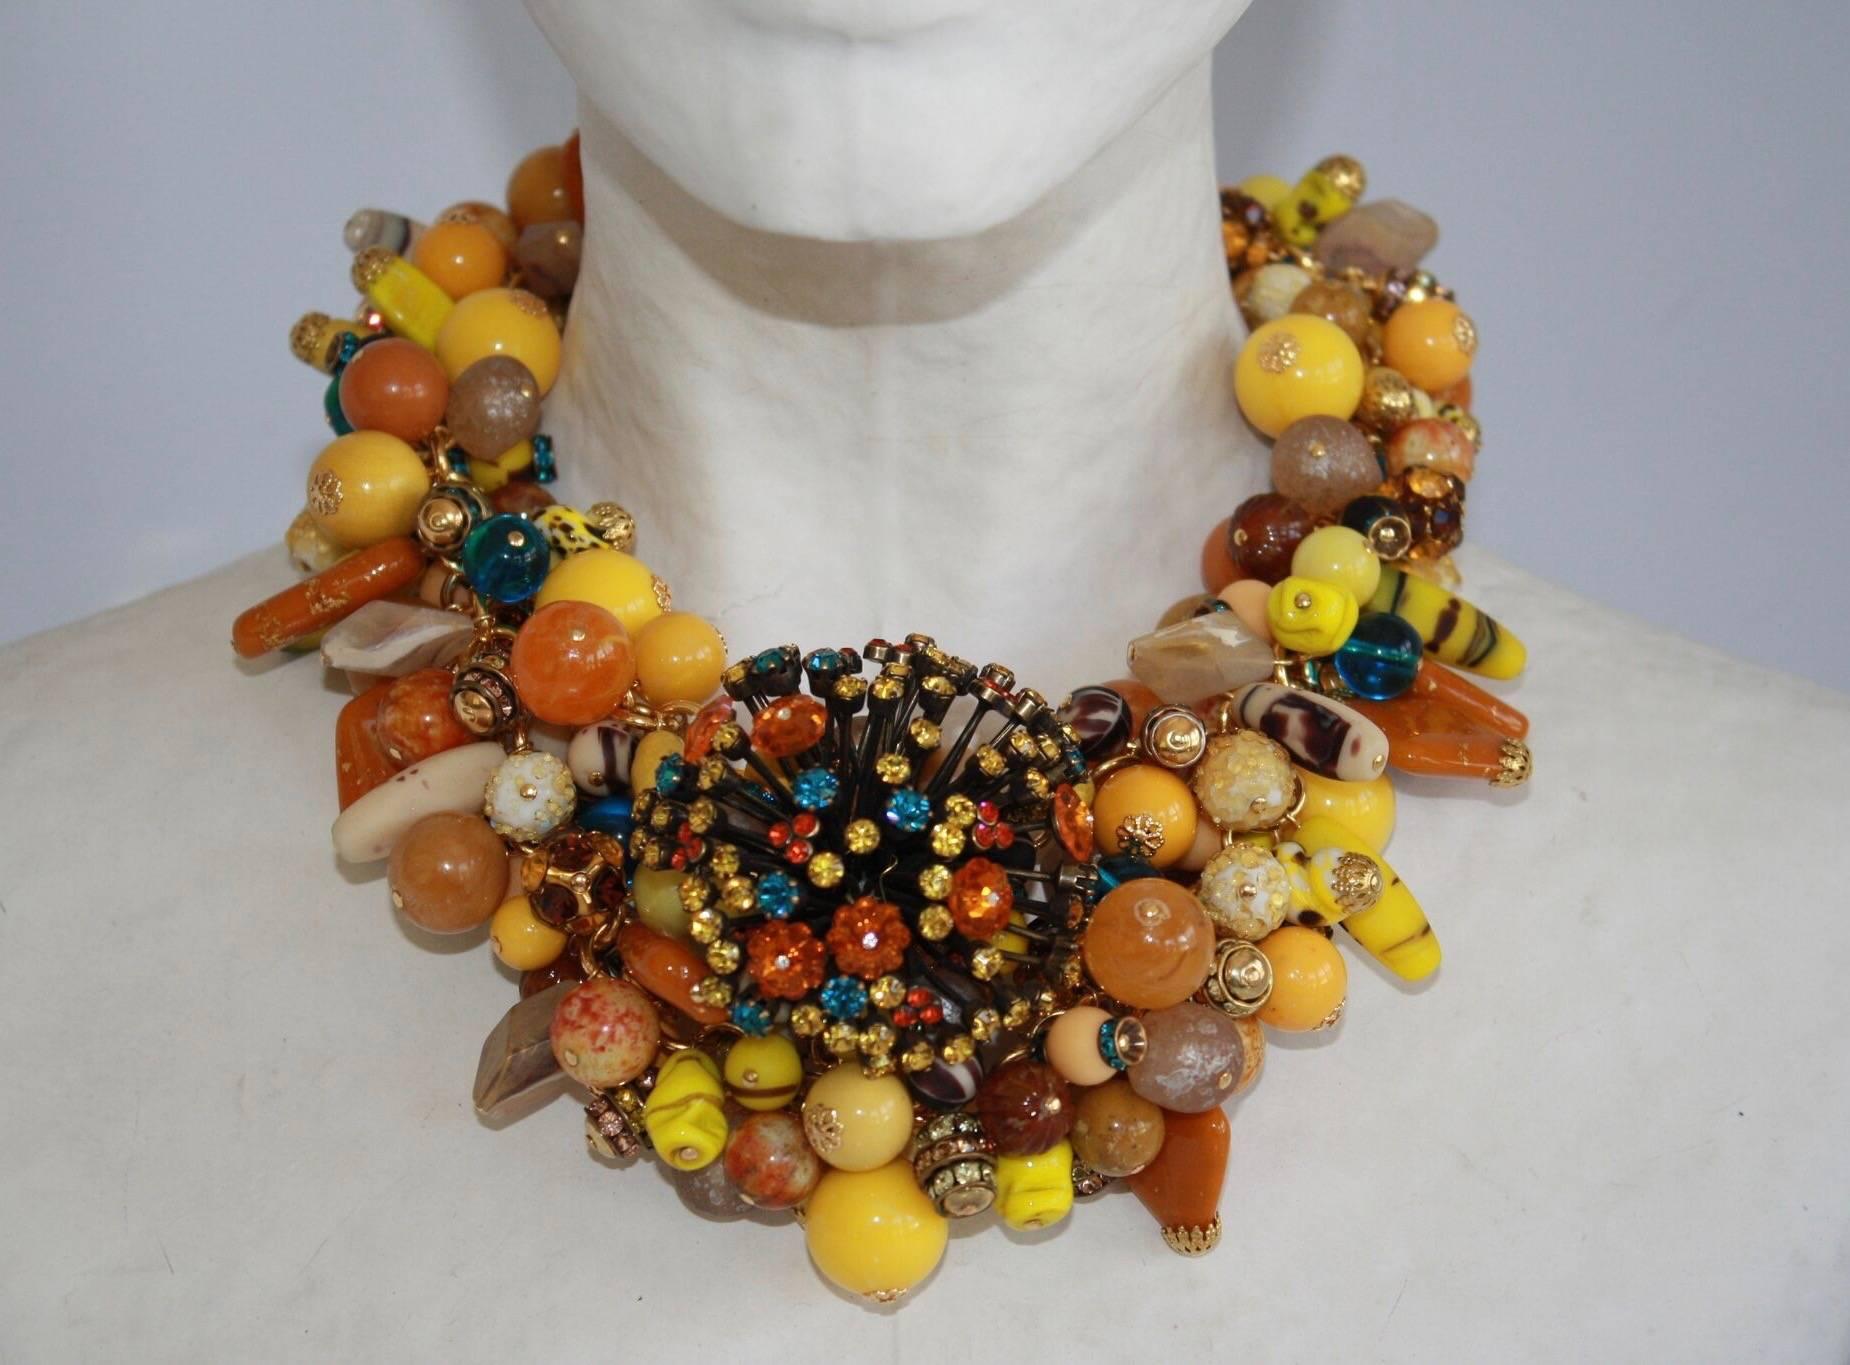 A one of a kind piece from French brand Francoise Montague. This gorgeous statement necklace is made with vintage glass beads and Swarovski Crystals. 

18